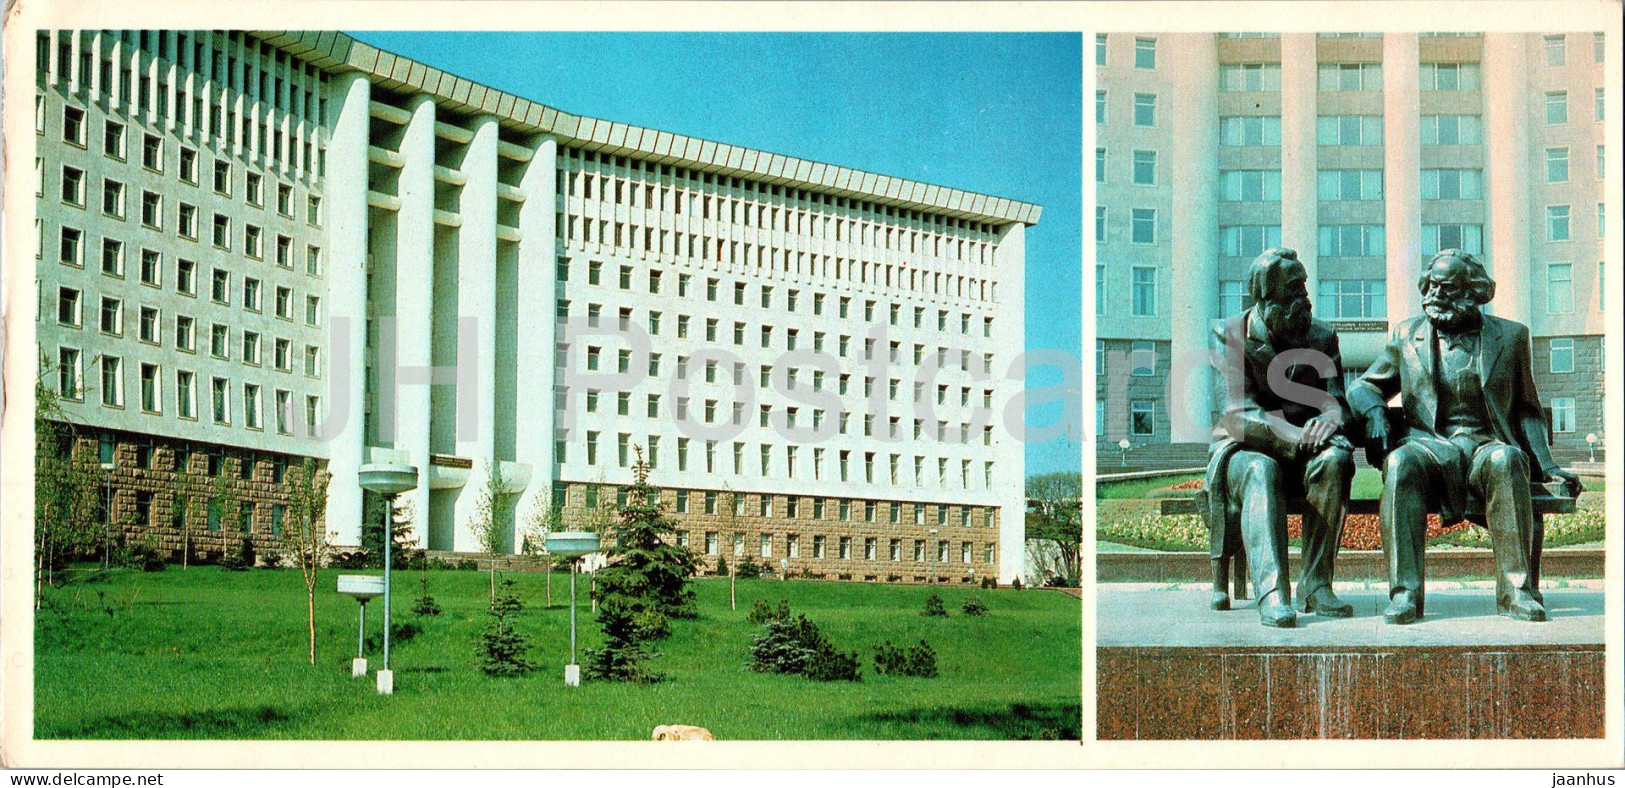 Chisinau - Monument To Marx And Engels - Central Committe Of The Communist Party Building - 1980 - Moldova USSR - Unused - Moldova